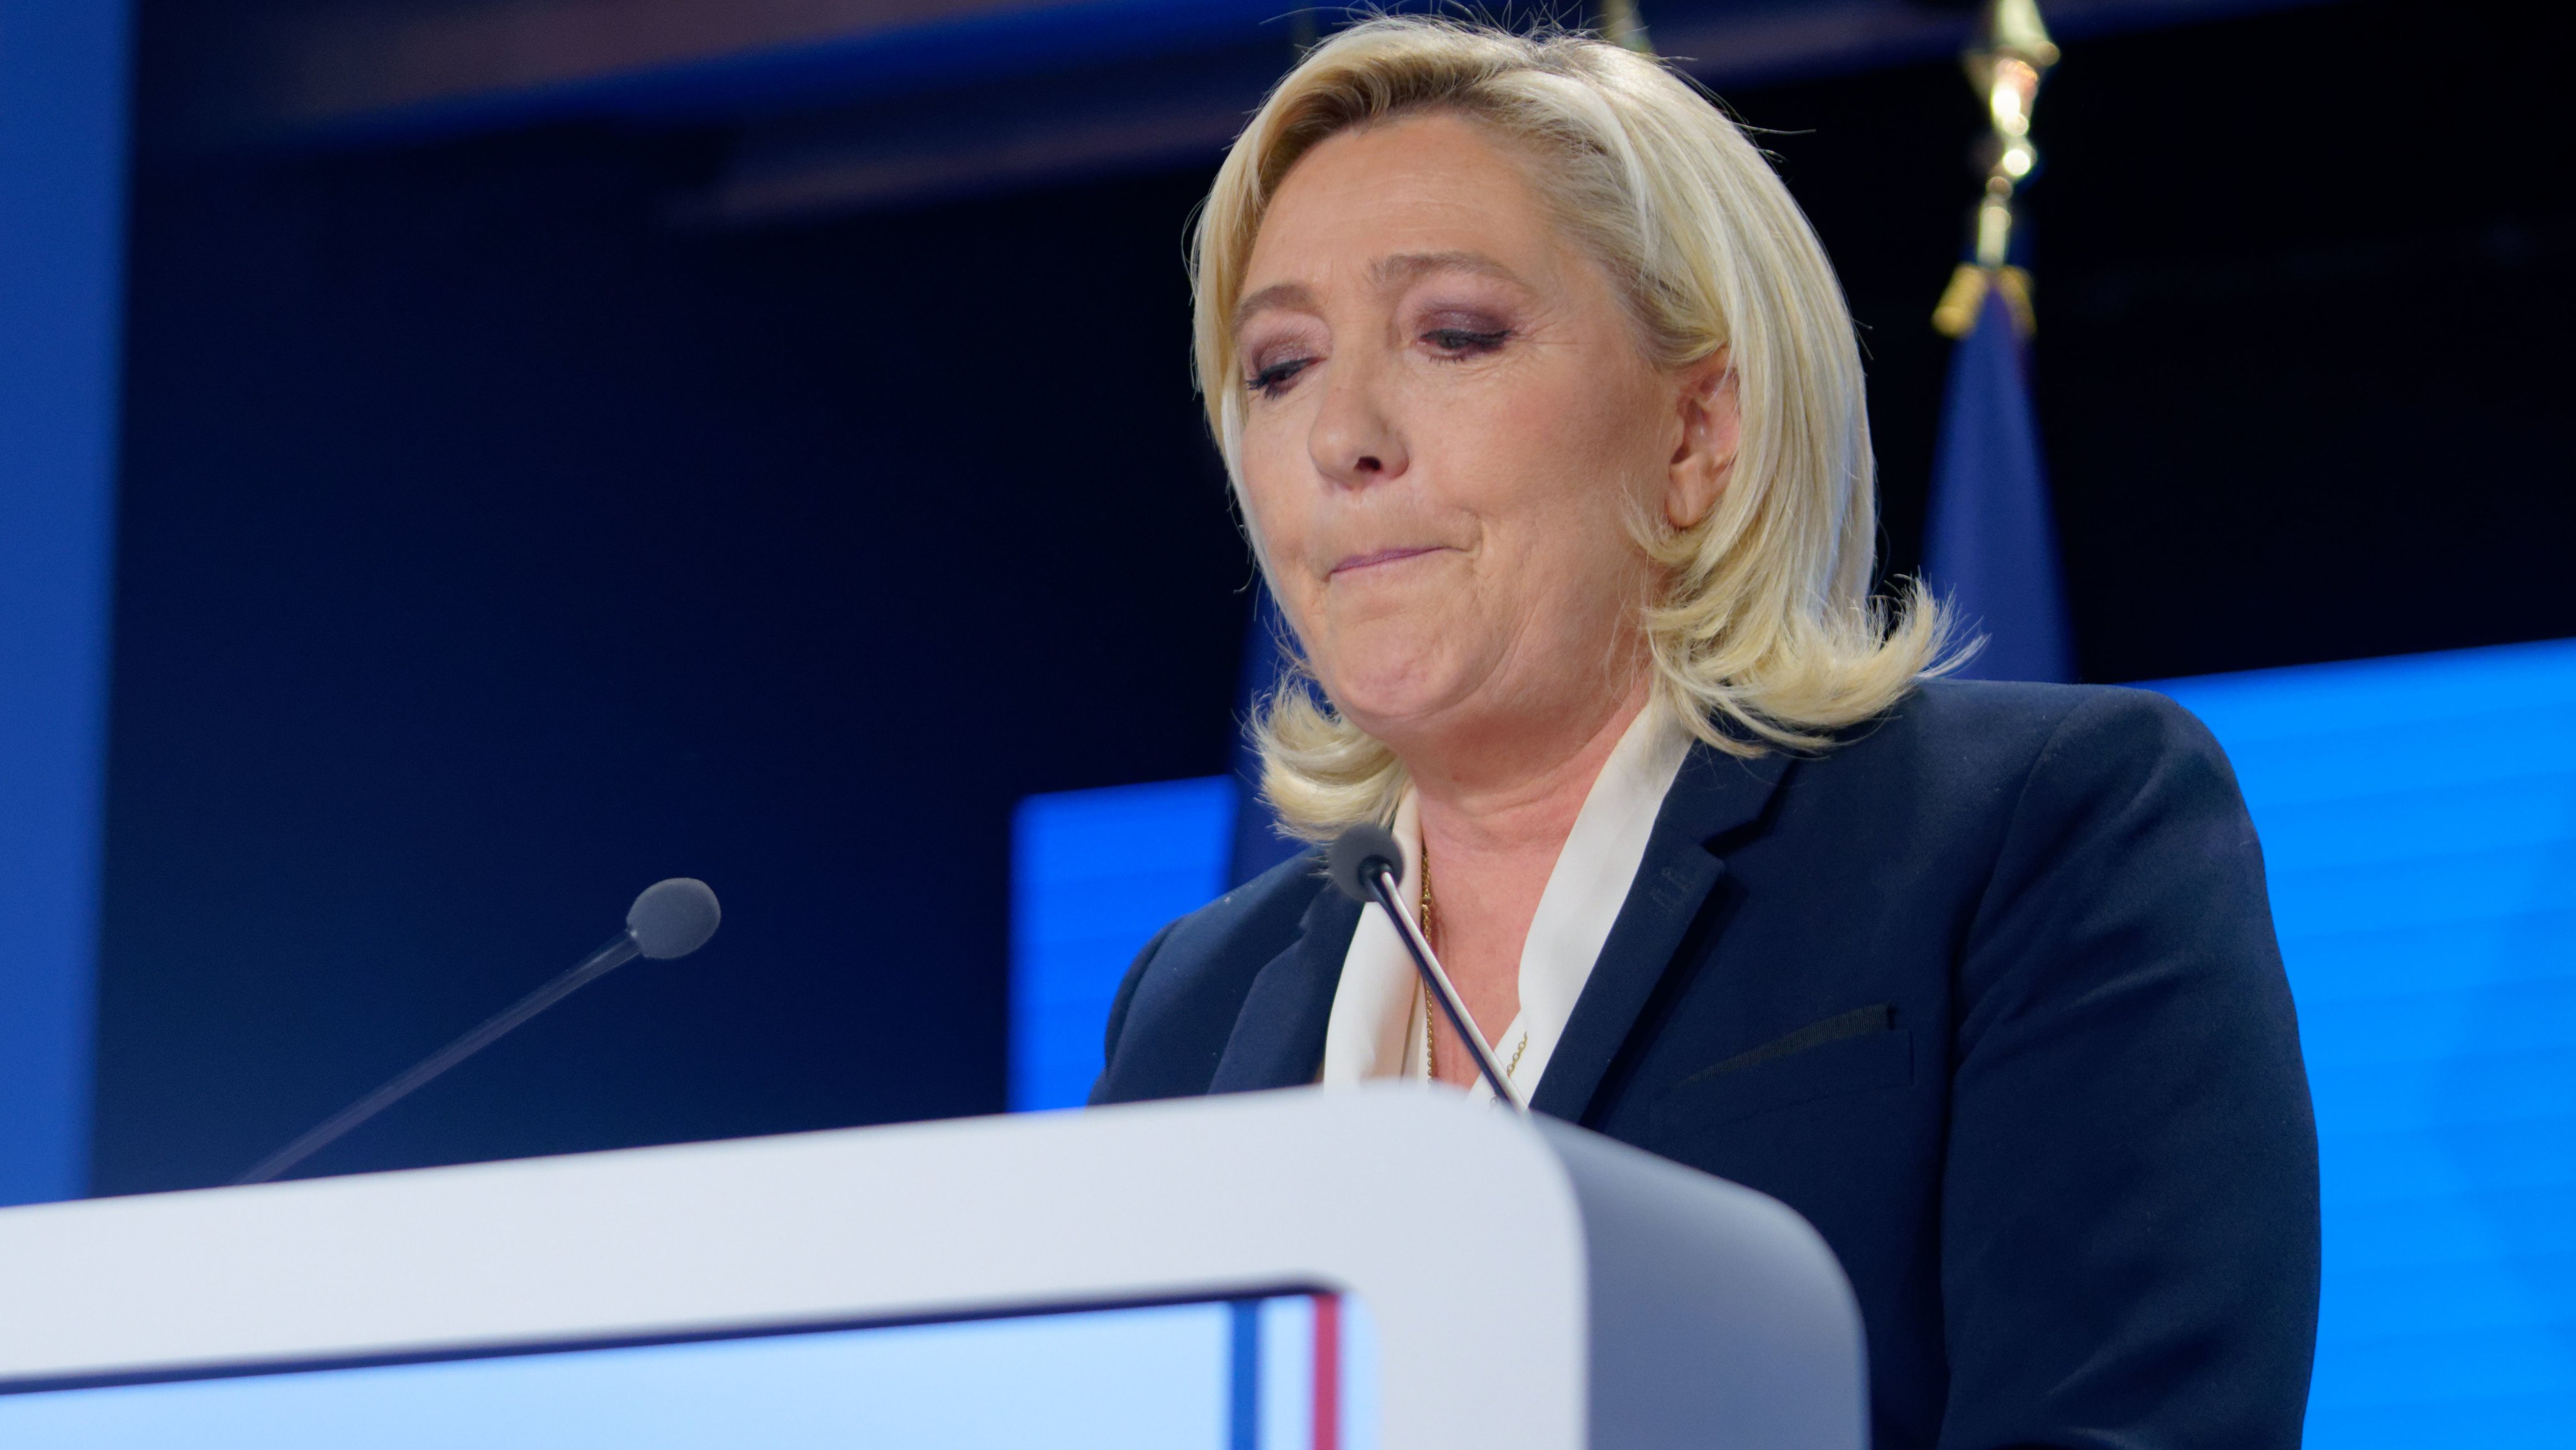 Election Night With Marine Le Pen&#039;s Rassemblement Nationale Party For France&#039;s 2022 Presidential Race Results